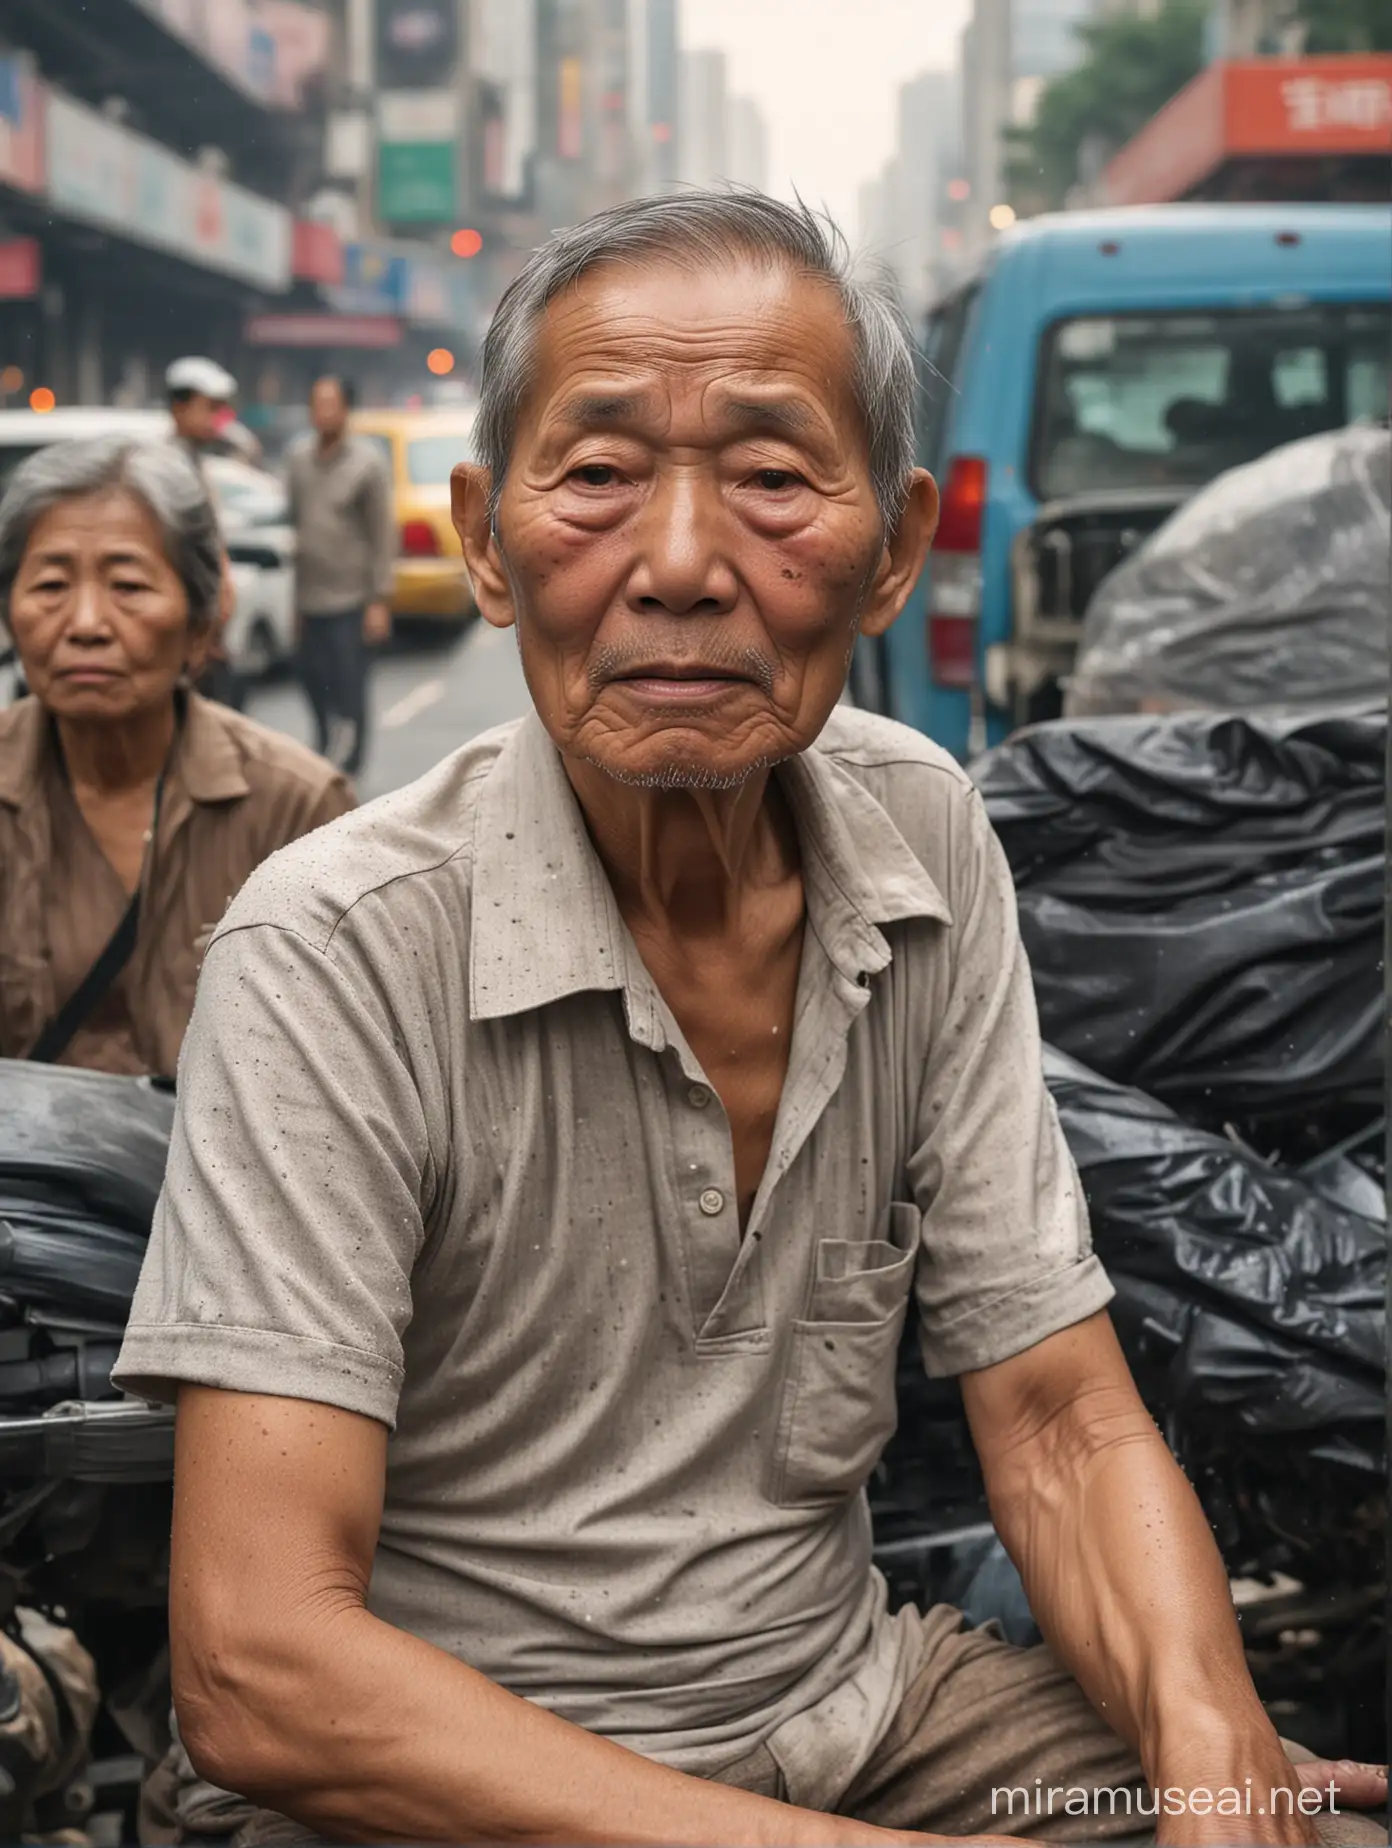 Exhausted Elderly Asian in Urban Pollution